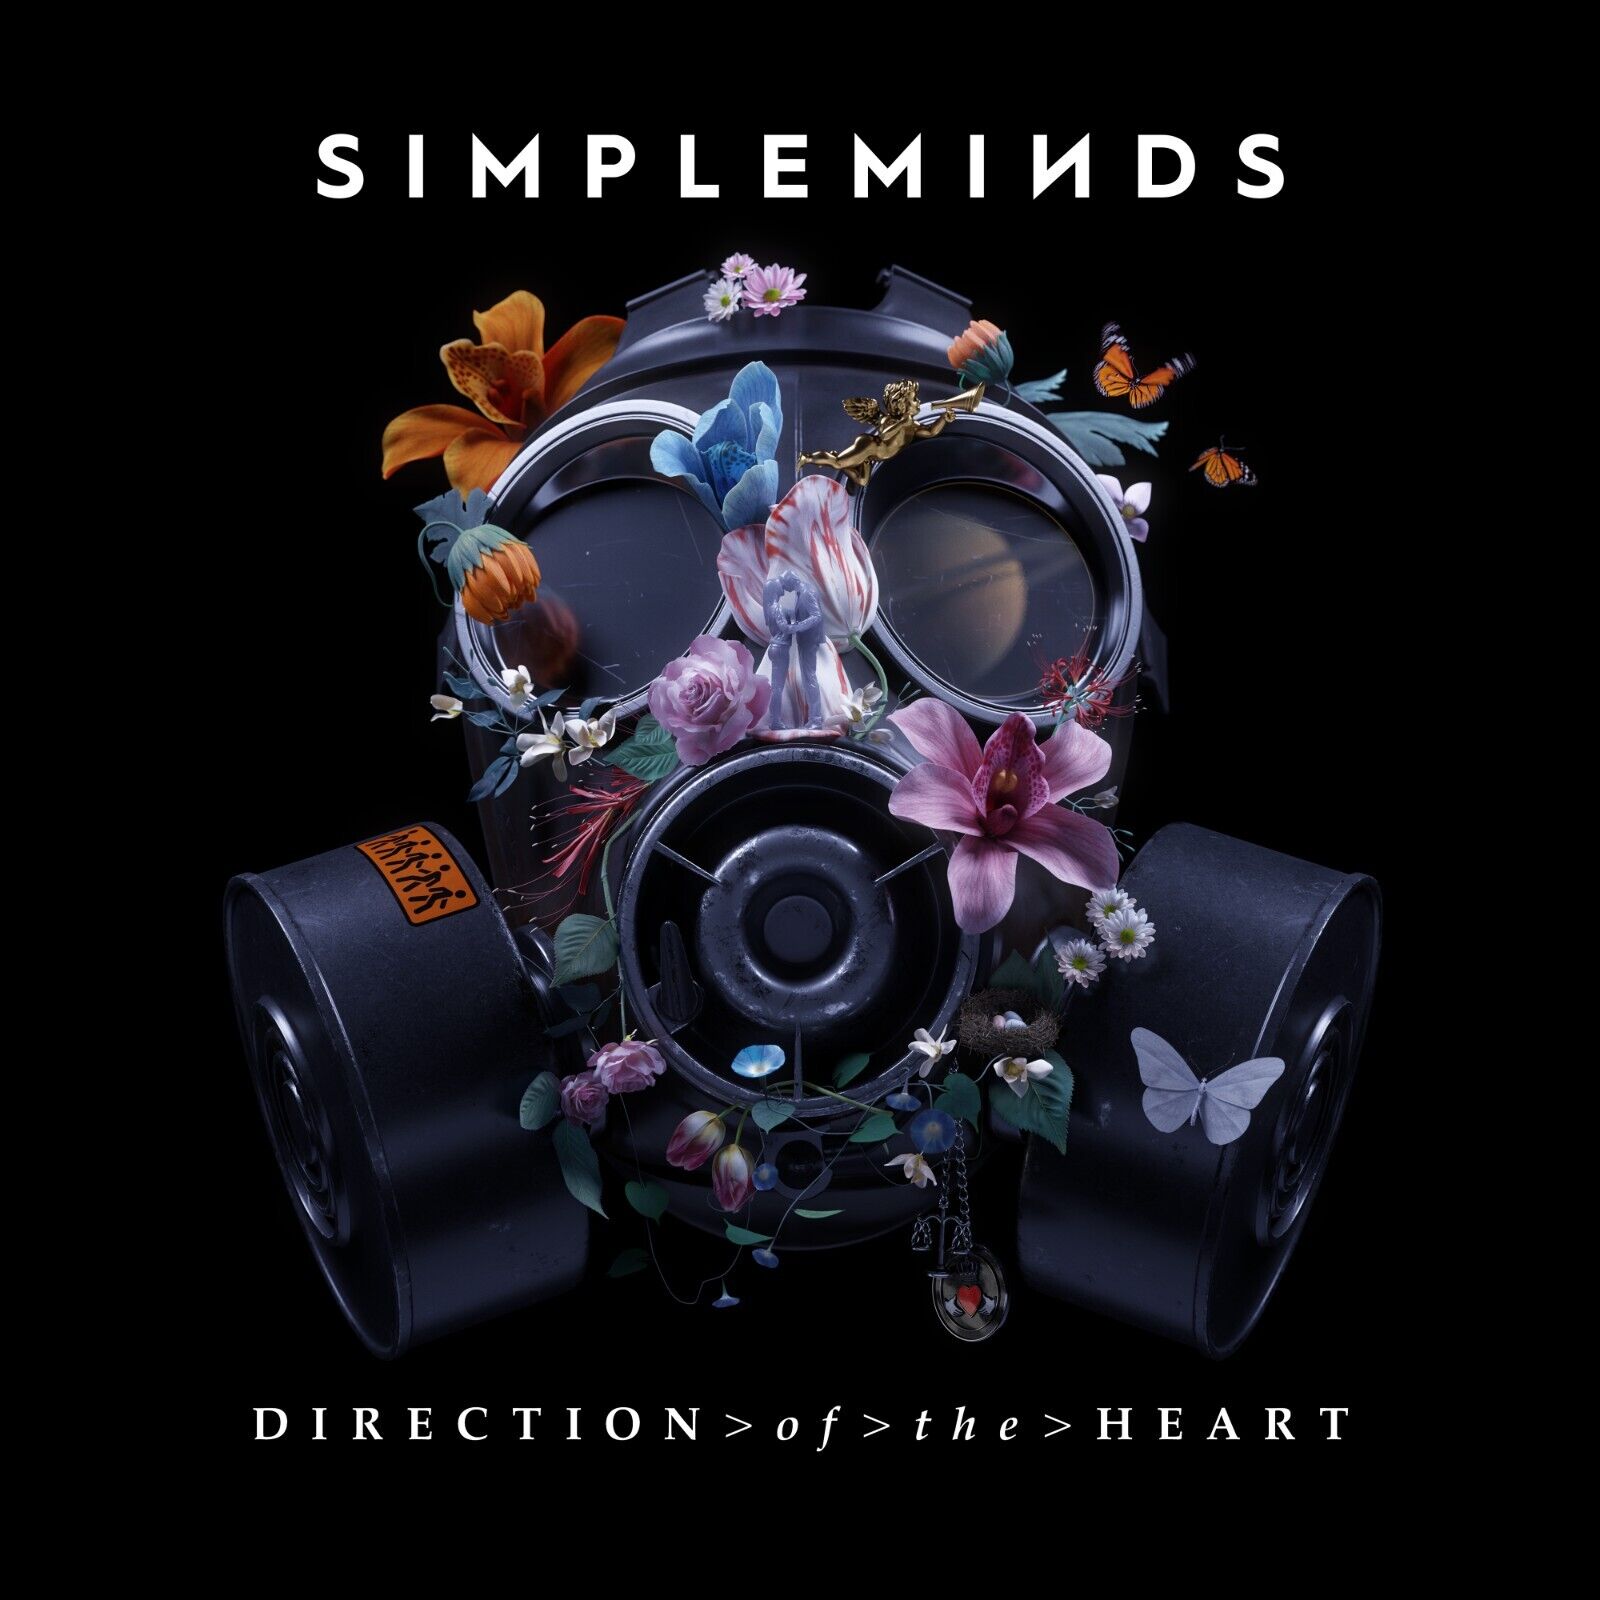 SIMPLE MINDS - Direction Of The Heart (ORANGE Vinyl LP) 2018 BMG NEW / SEALED